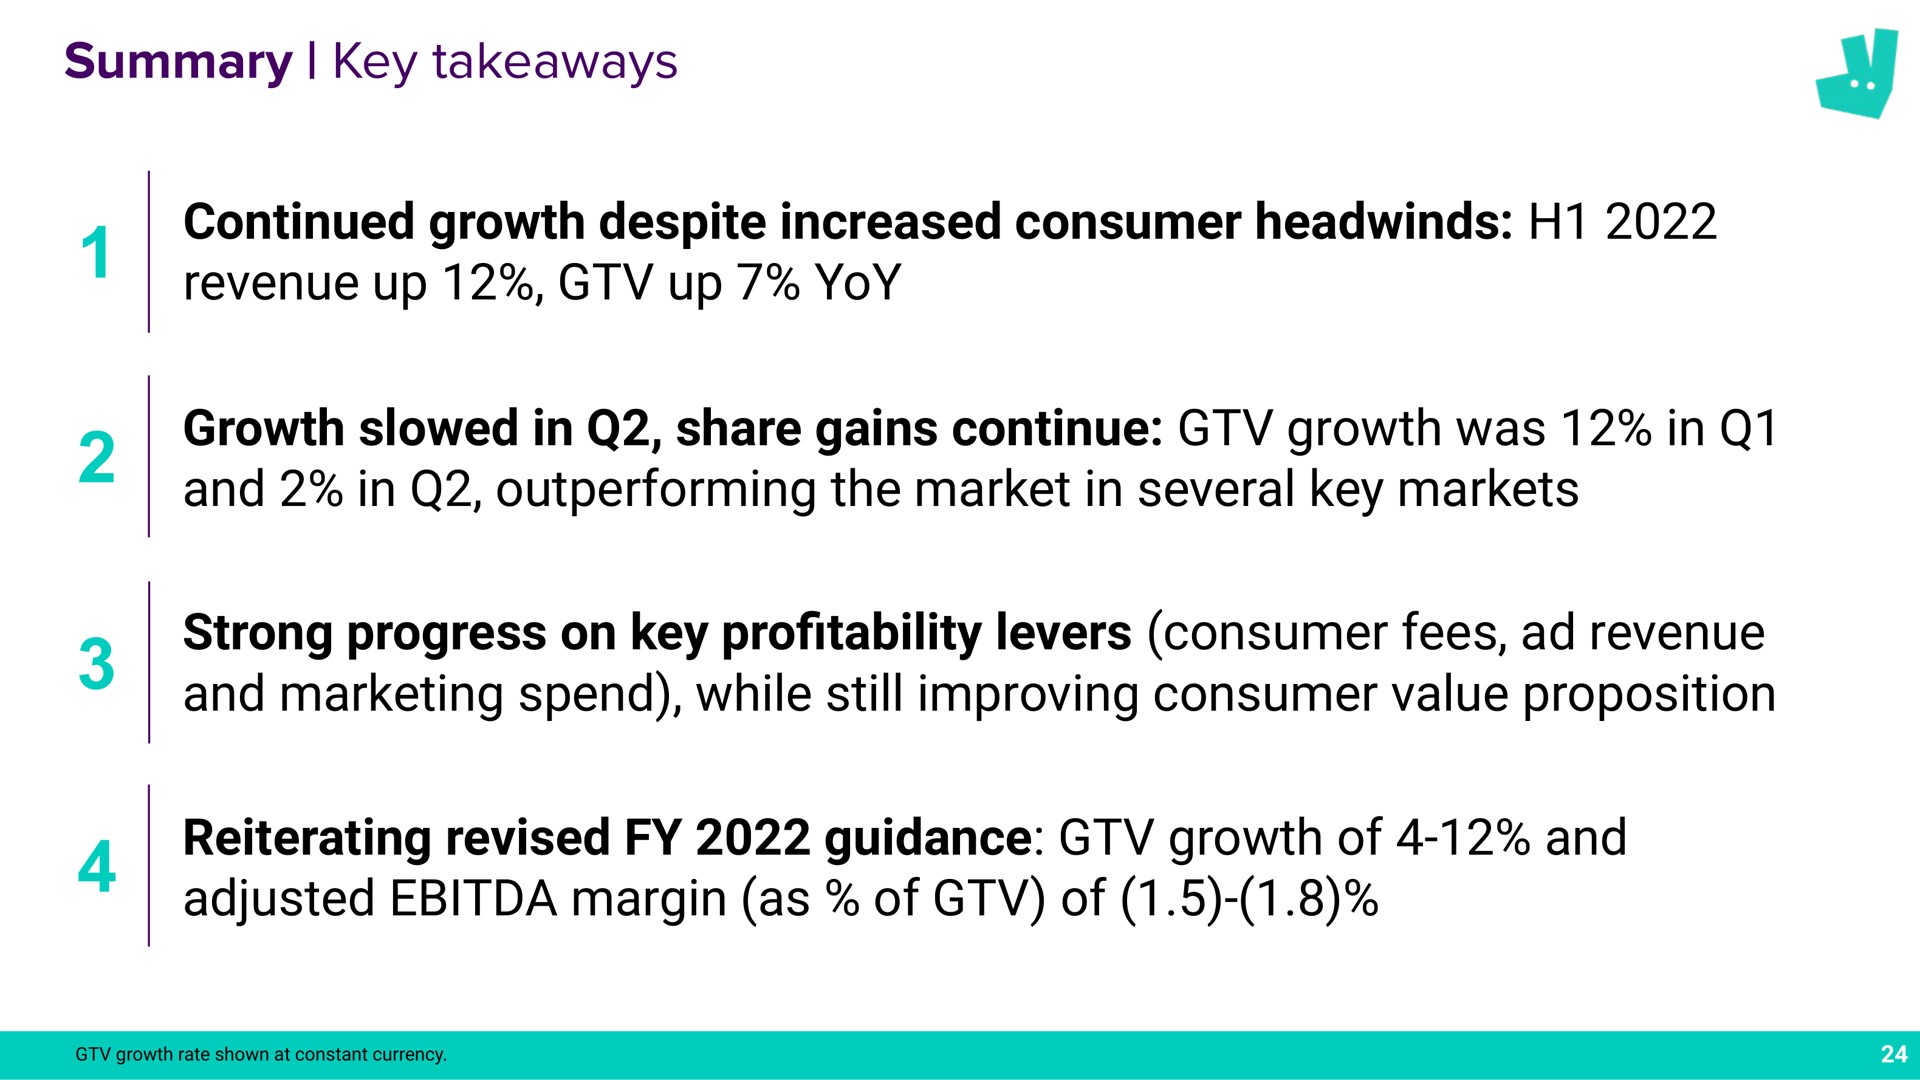 summary key continued growth despite increased consumer revenue up up yoy growth slowed in share gains continue growth was in and in outperforming the market in several key markets strong progress on key pro levers consumer fees revenue and marketing spend while still improving consumer value proposition reiterating revised guidance growth of and adjusted margin as of of a profitability | Deliveroo